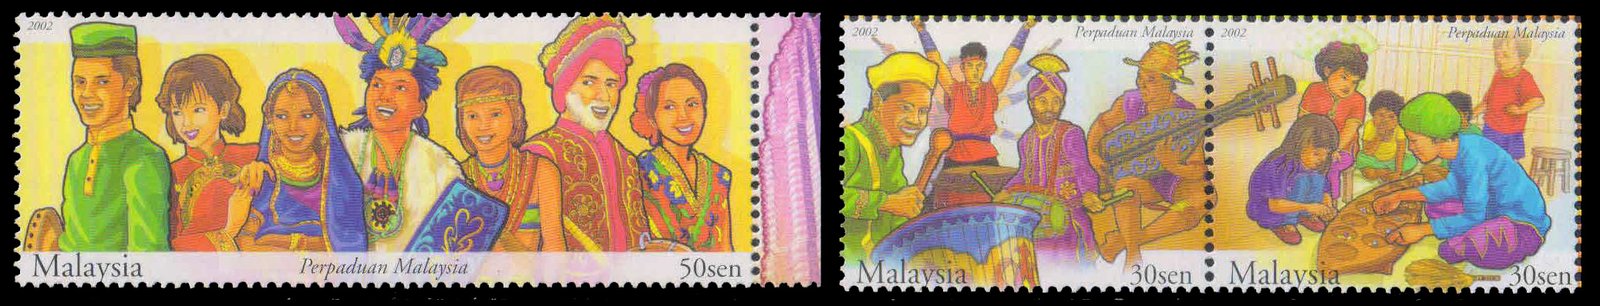 MALAYSIA 2002-Malaysian Unity-Children from Different Races, Set of 3, MNH, Musician and Dancers, S.G. 1092-94